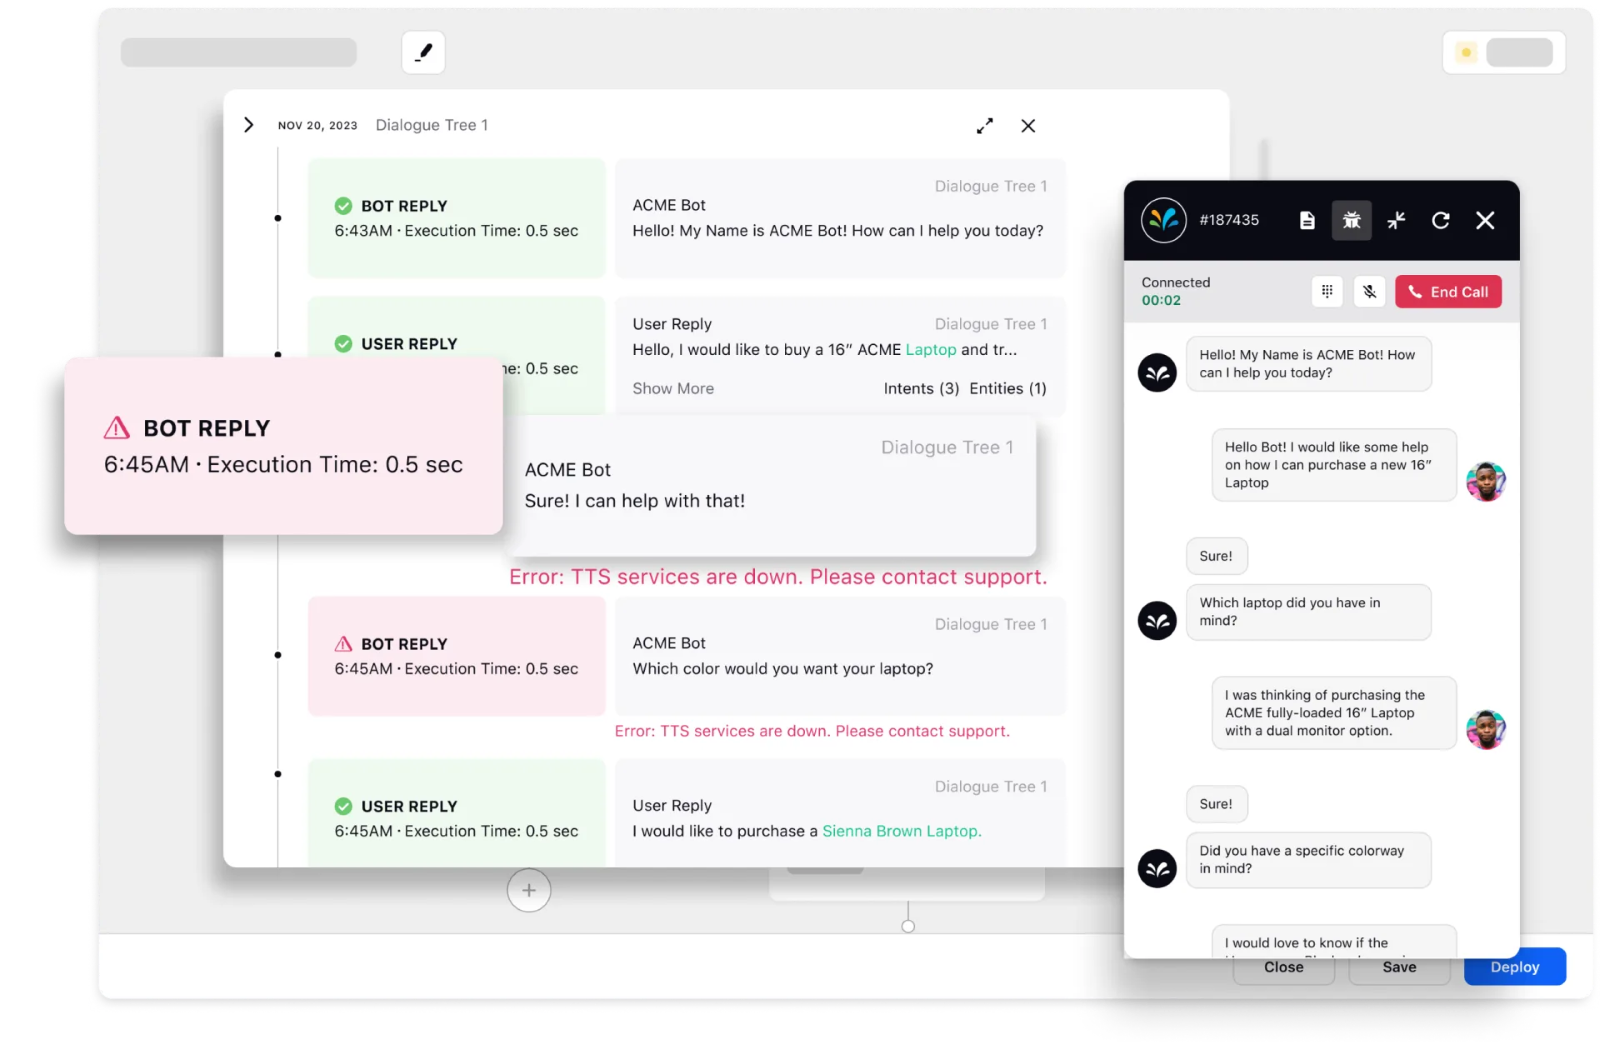 Sprinklr's conversational AI platform conducts in-platform testing of bot intents to detect bugs timely